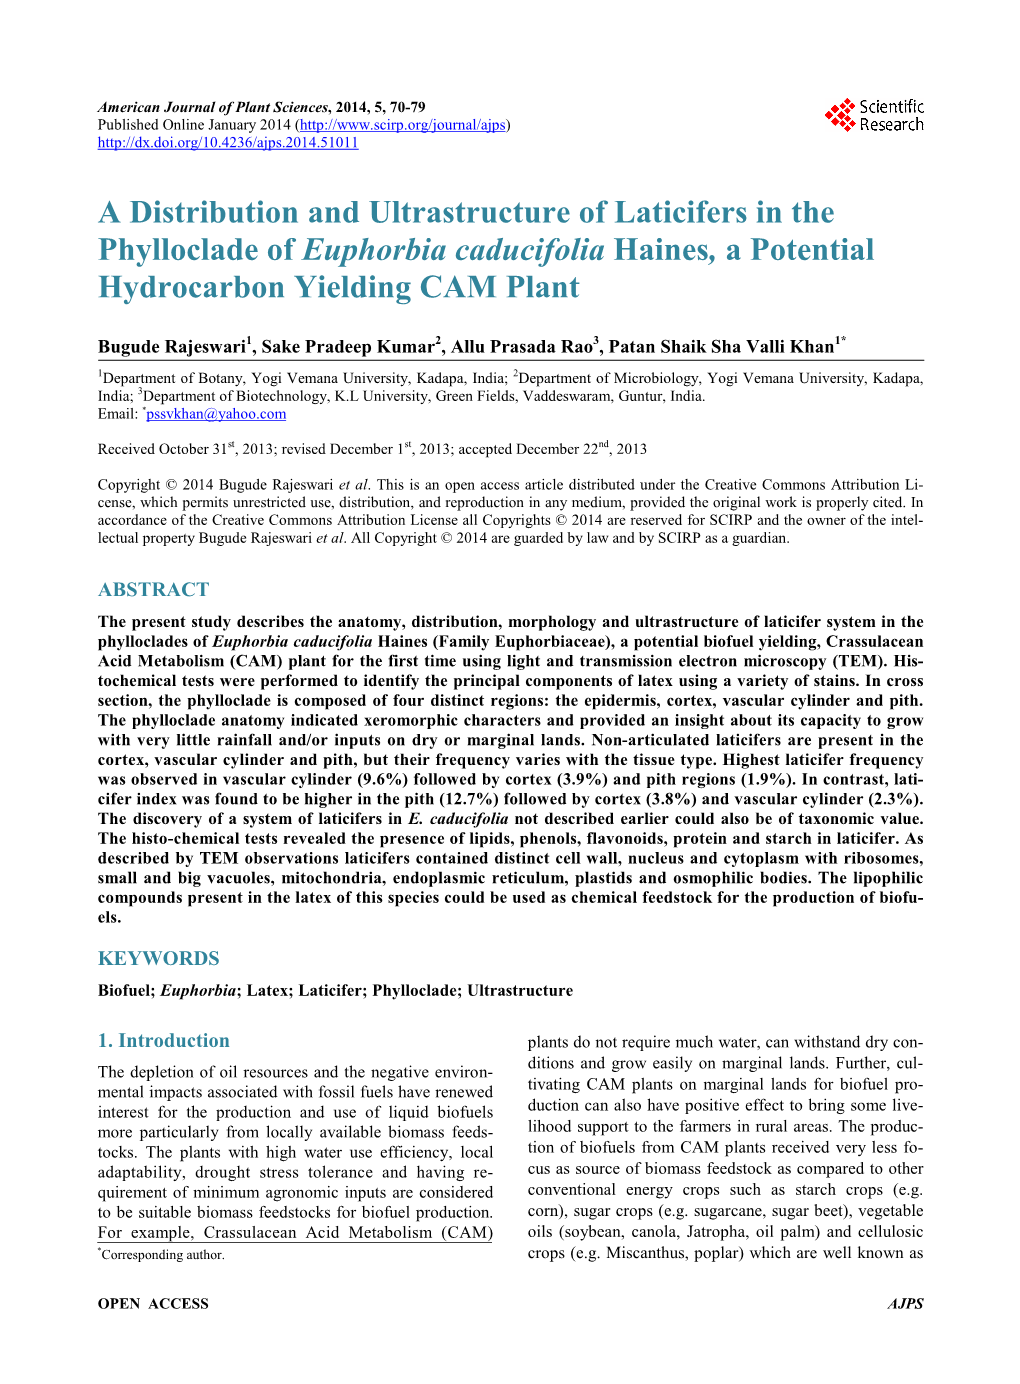 A Distribution and Ultrastructure of Laticifers in the Phylloclade of Euphorbia Caducifolia Haines, a Potential Hydrocarbon Yielding CAM Plant